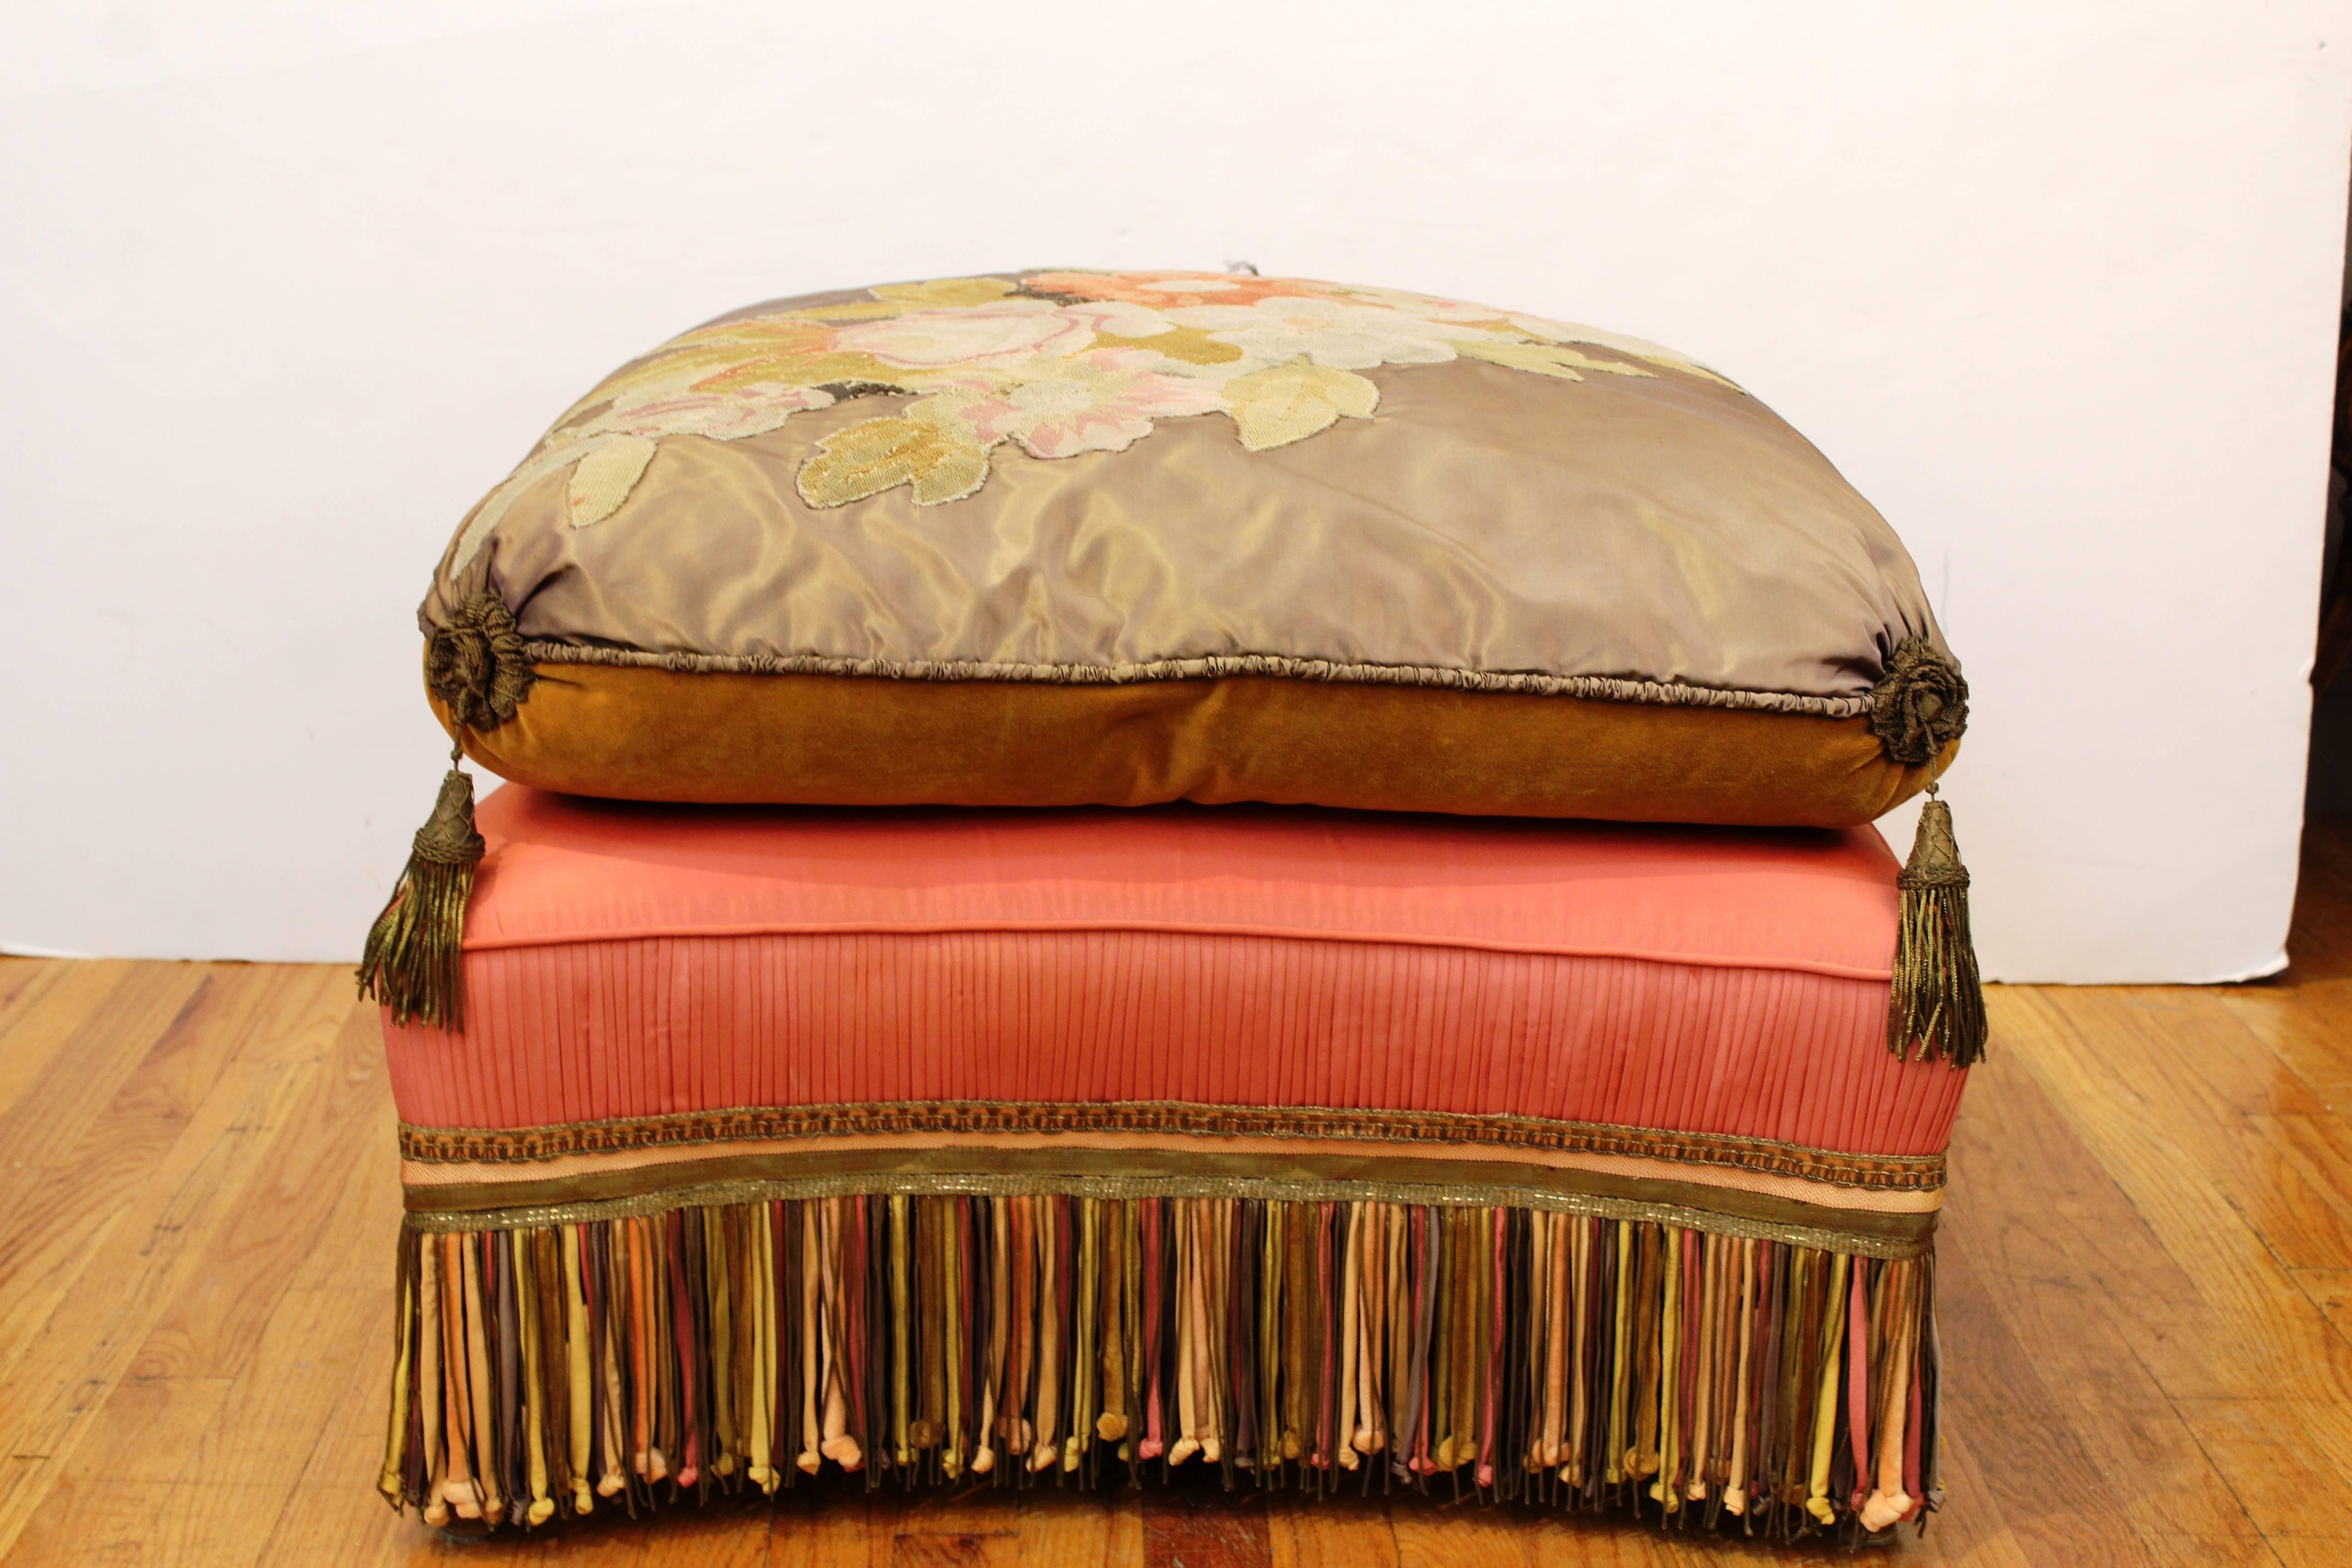 A large Victorian ottoman with detailed floral needlework on the seat cushion. decorative borders and tassels at the corners, with a refined multicolored fringe. Wear appropriate to age and use, in good condition.